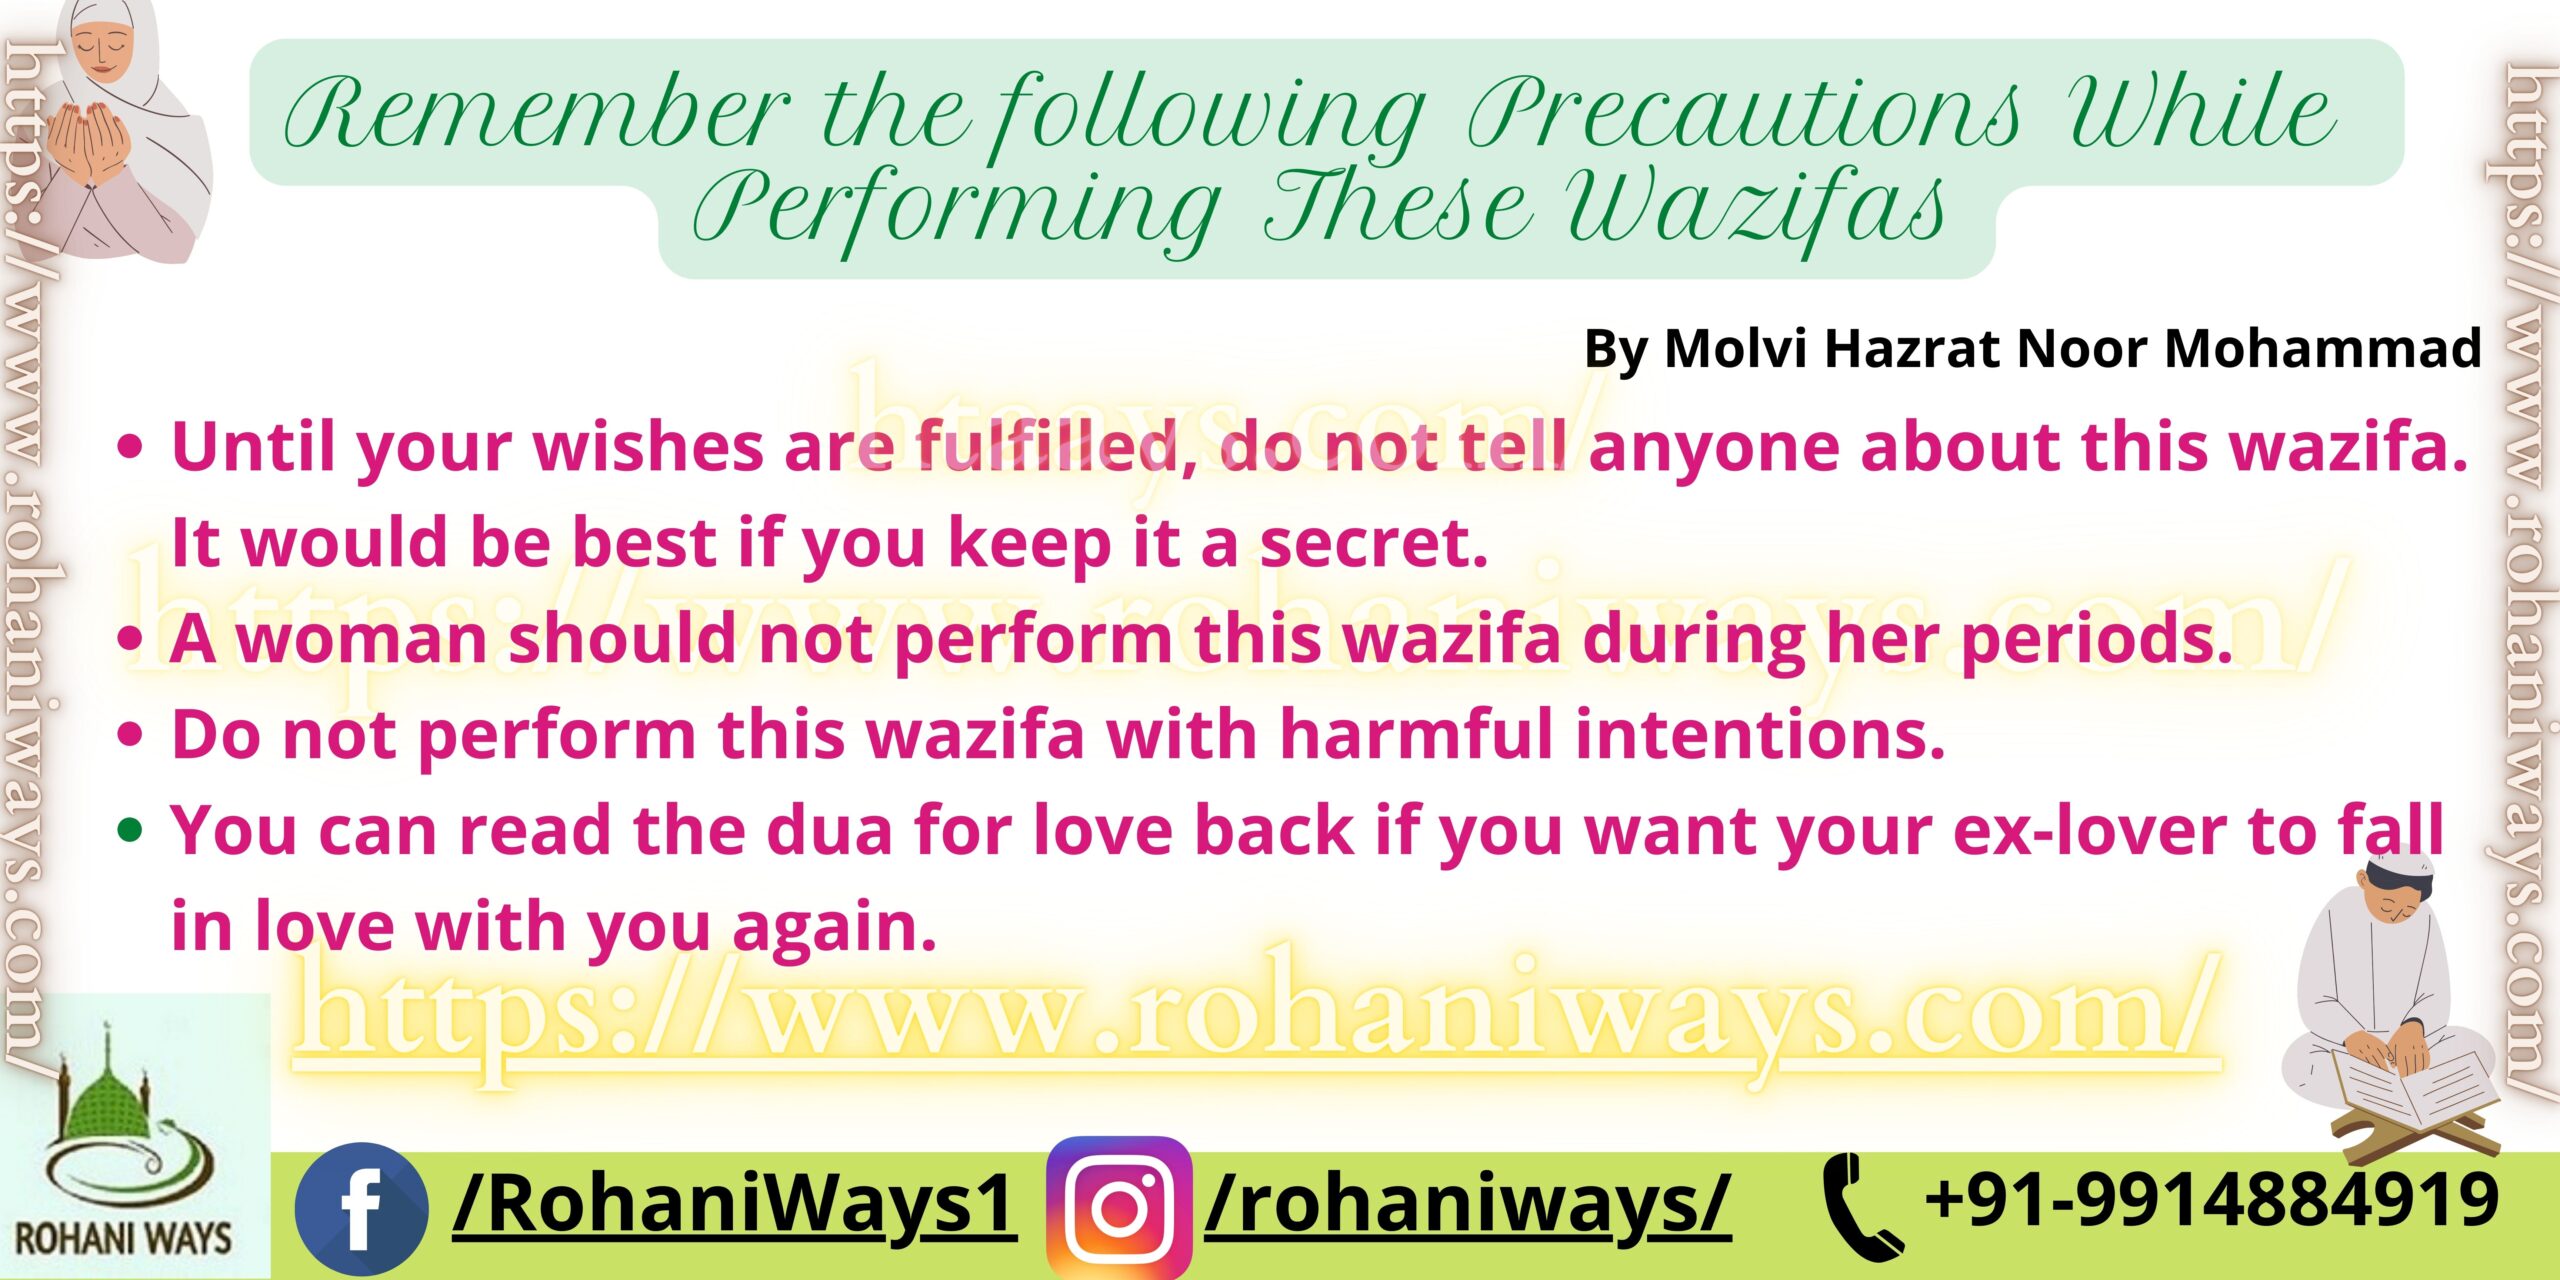 Precautions While Performing These Wazifas